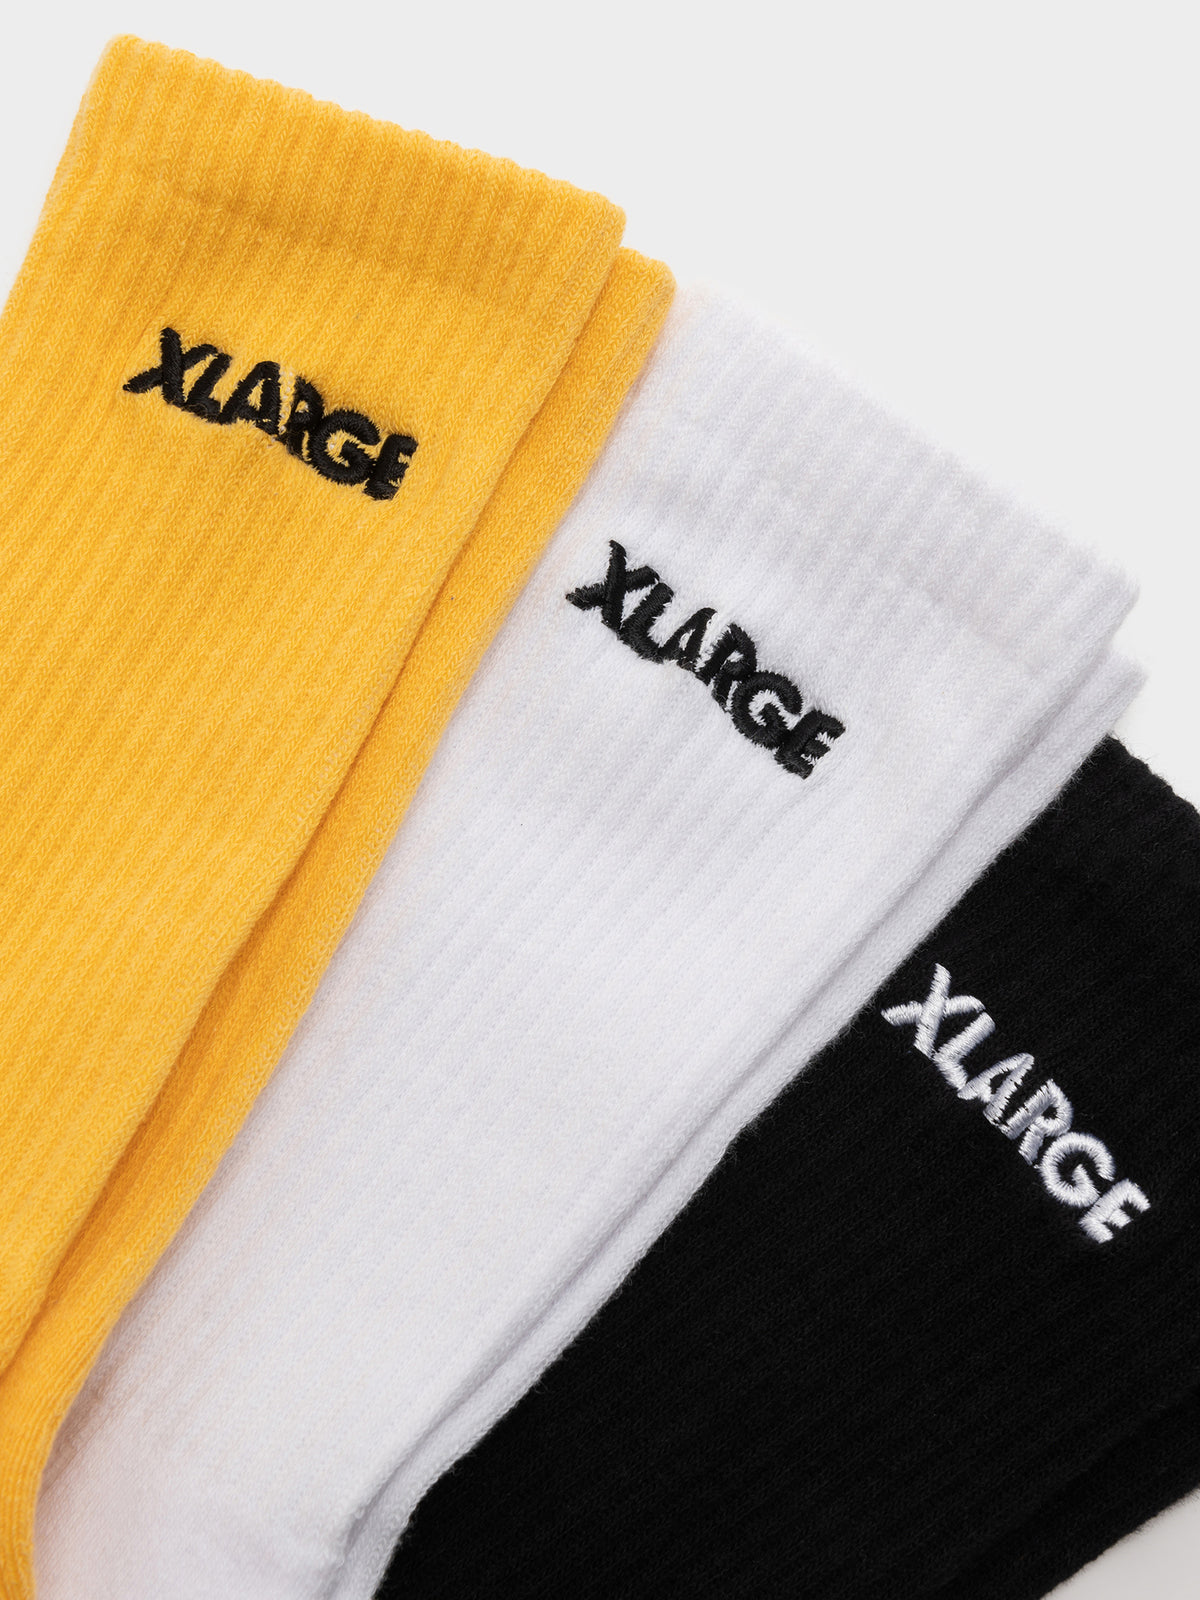 3 Pairs of 91 Text Socks in White, Black &amp; Yellow